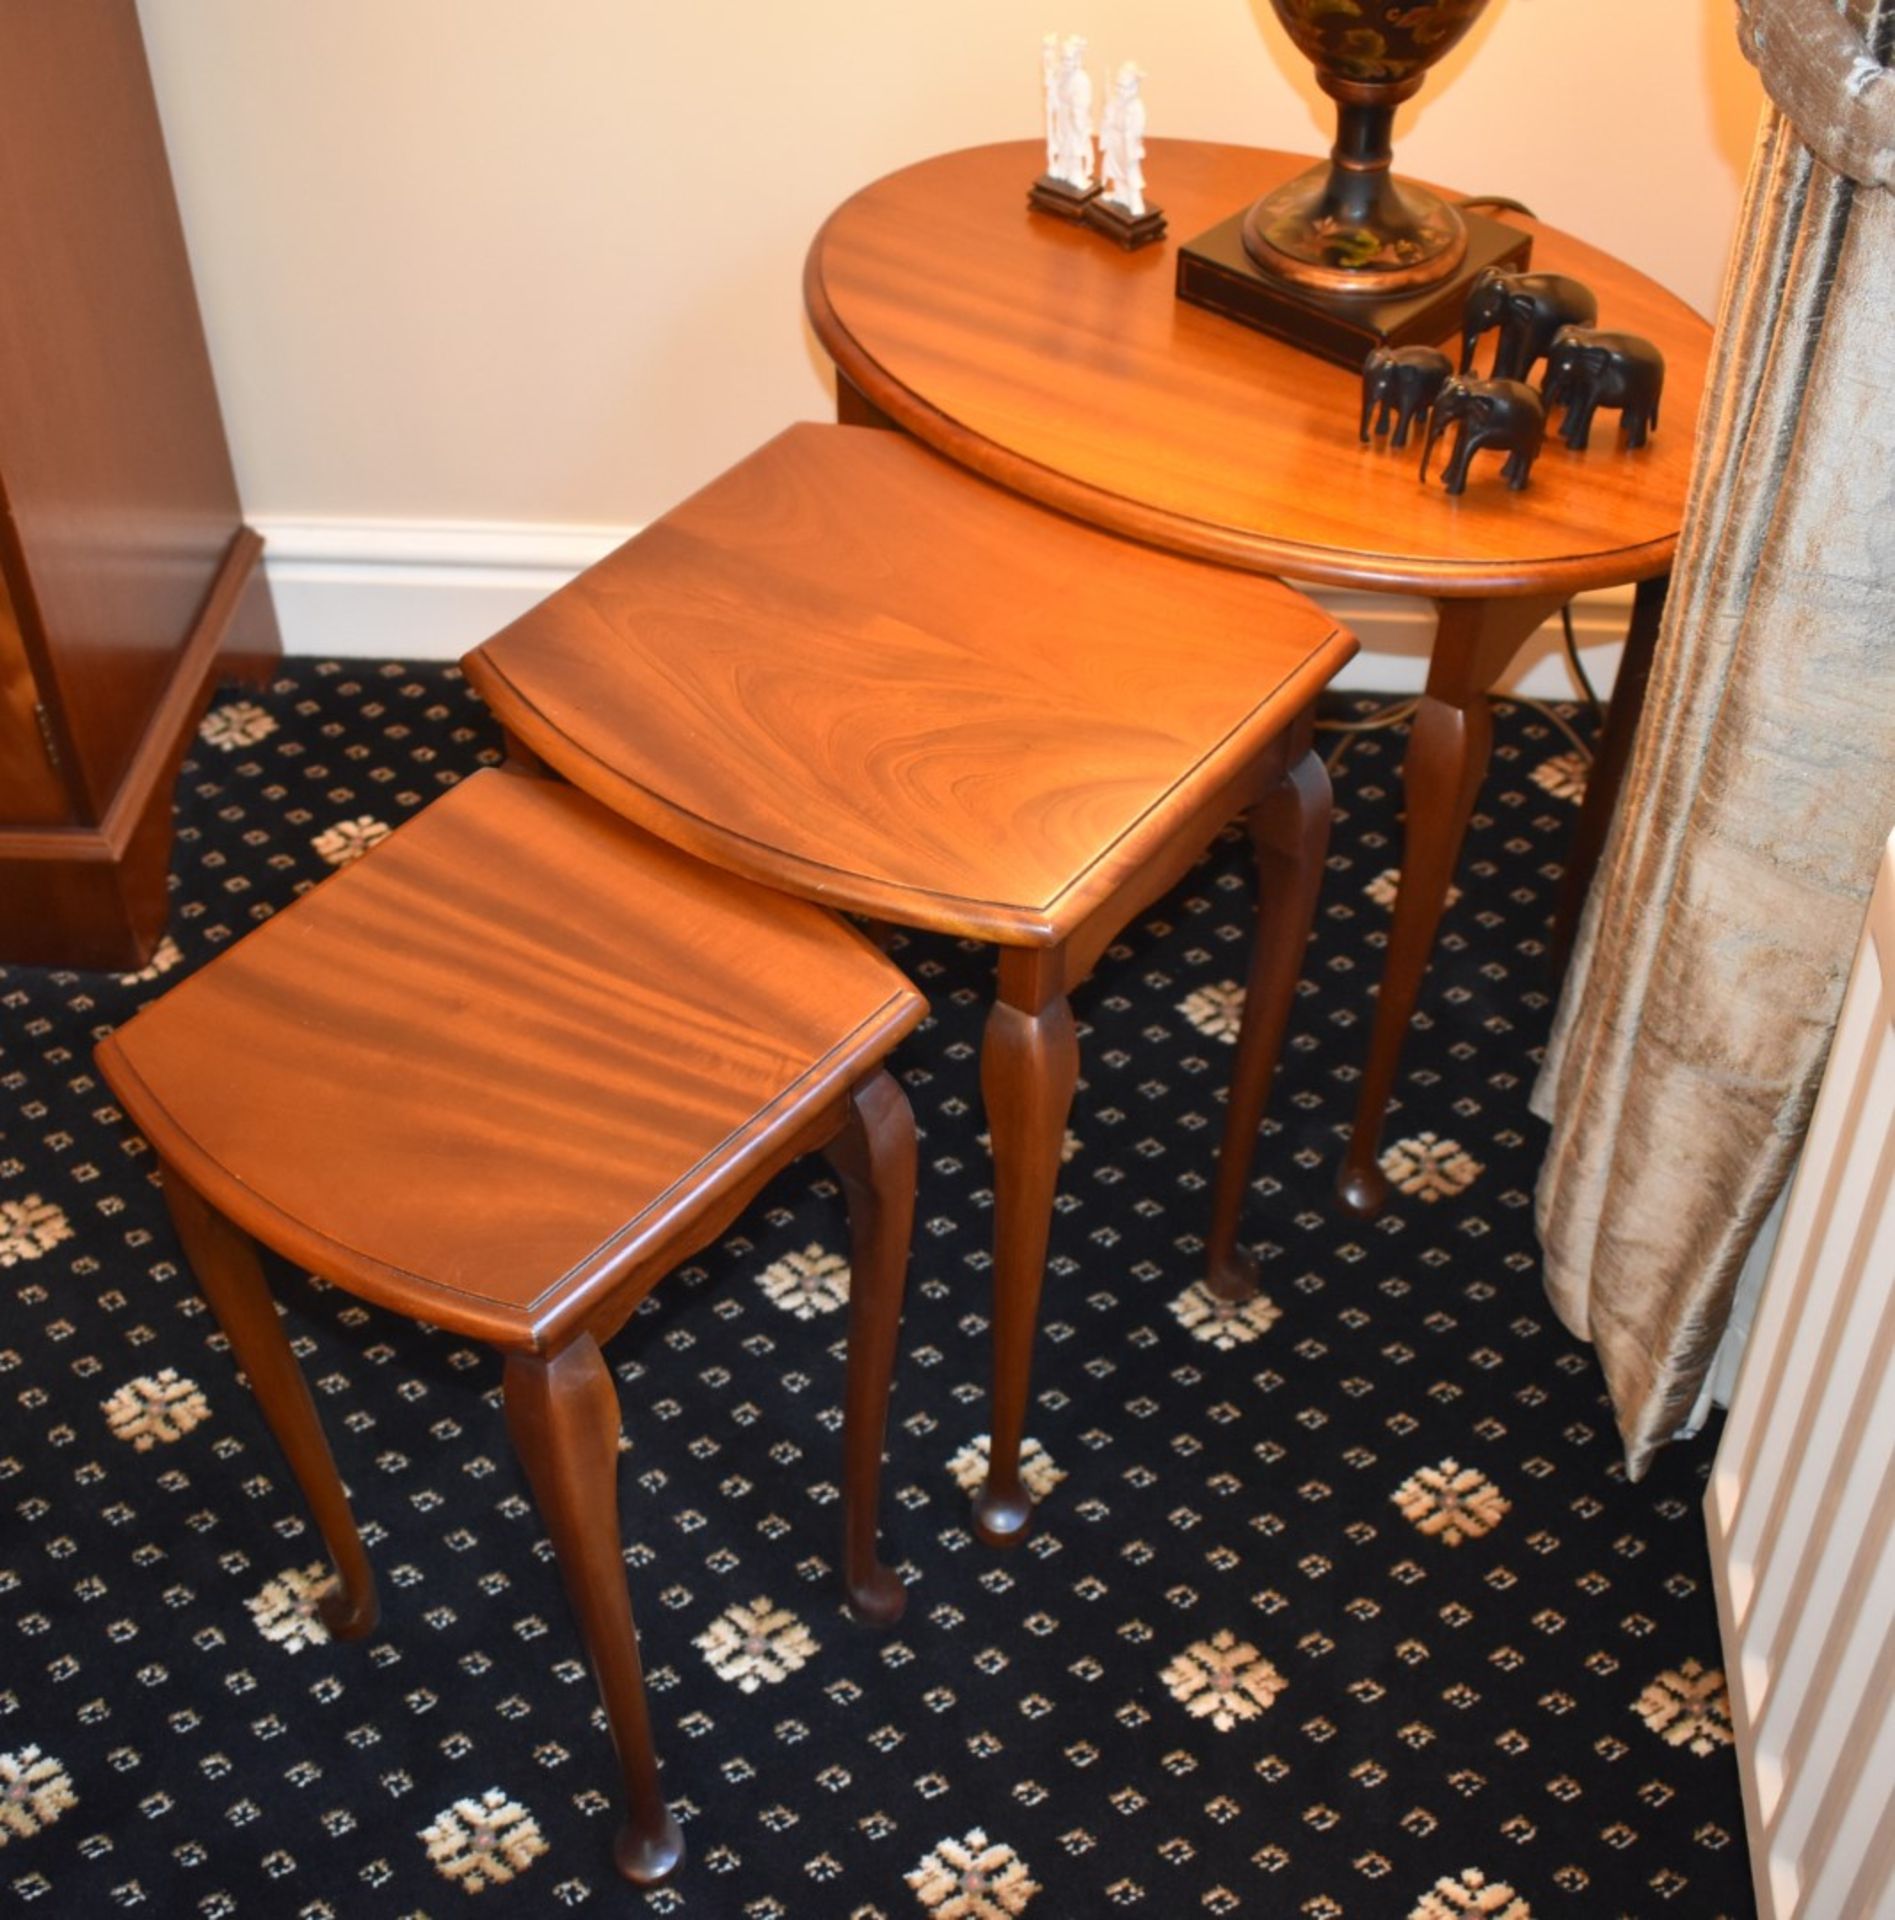 1 x Nest of Three Tables With Queen Anne Legs - Circa 1920's - Recently Restored in Stunning